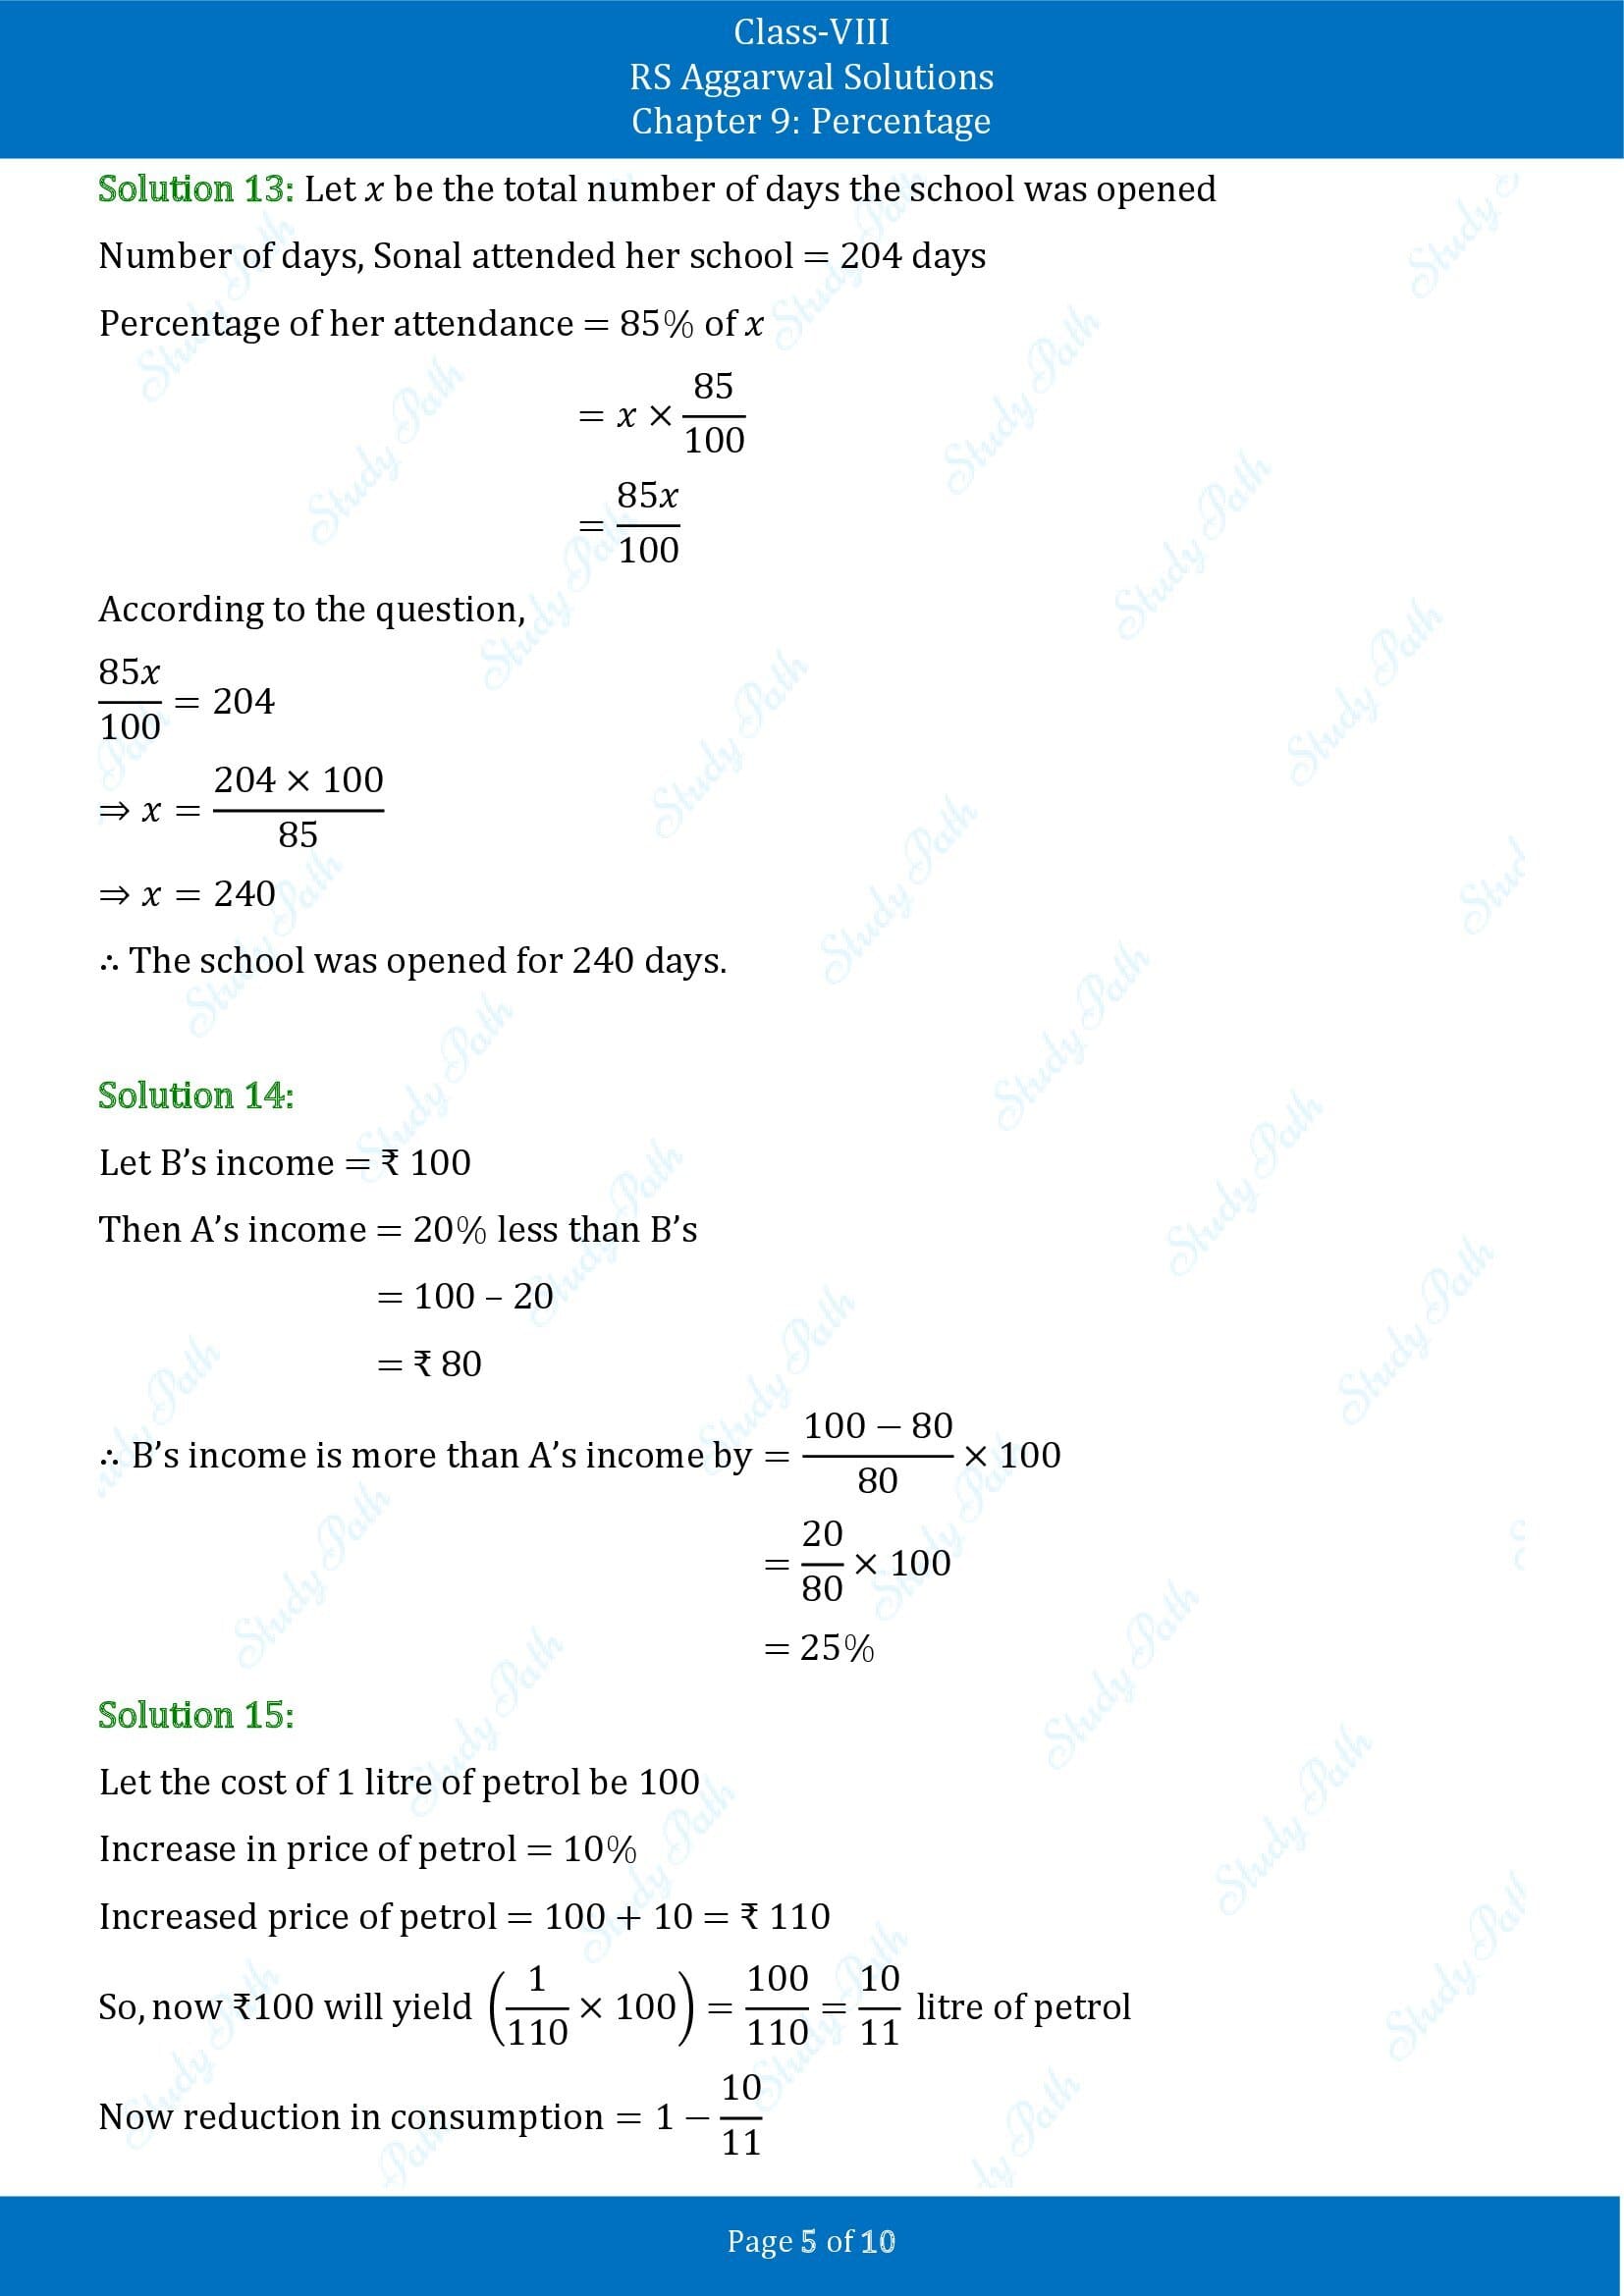 RS Aggarwal Solutions Class 8 Chapter 9 Percentage Exercise 9A 00005